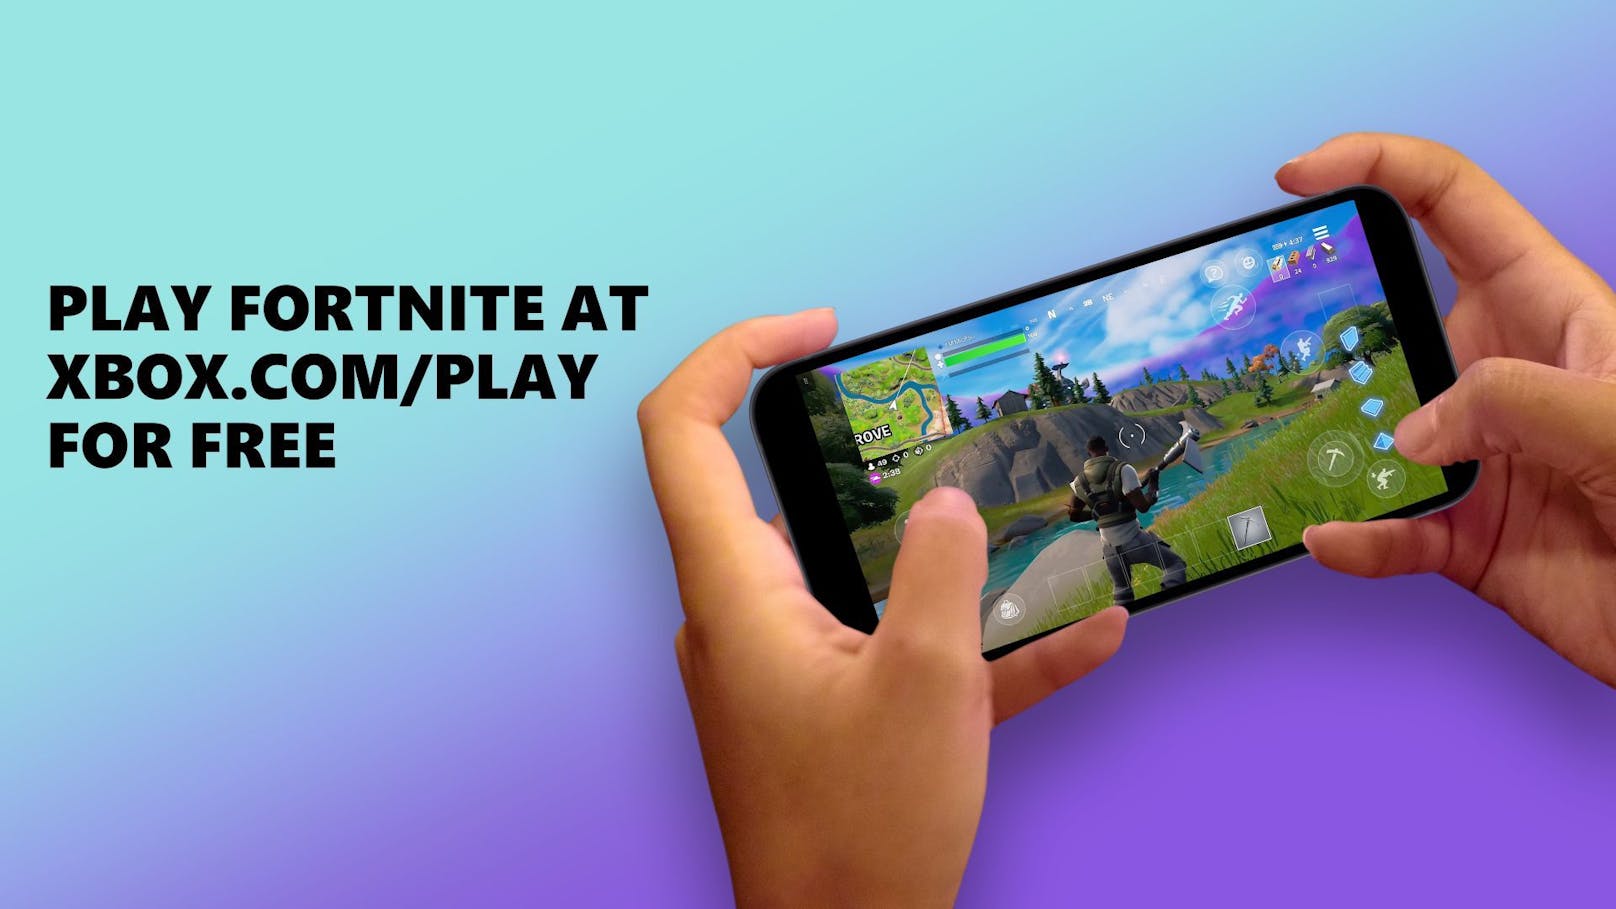 Xbox Cloud Gaming: "Fortnite" ab sofort free-to-play streamen.